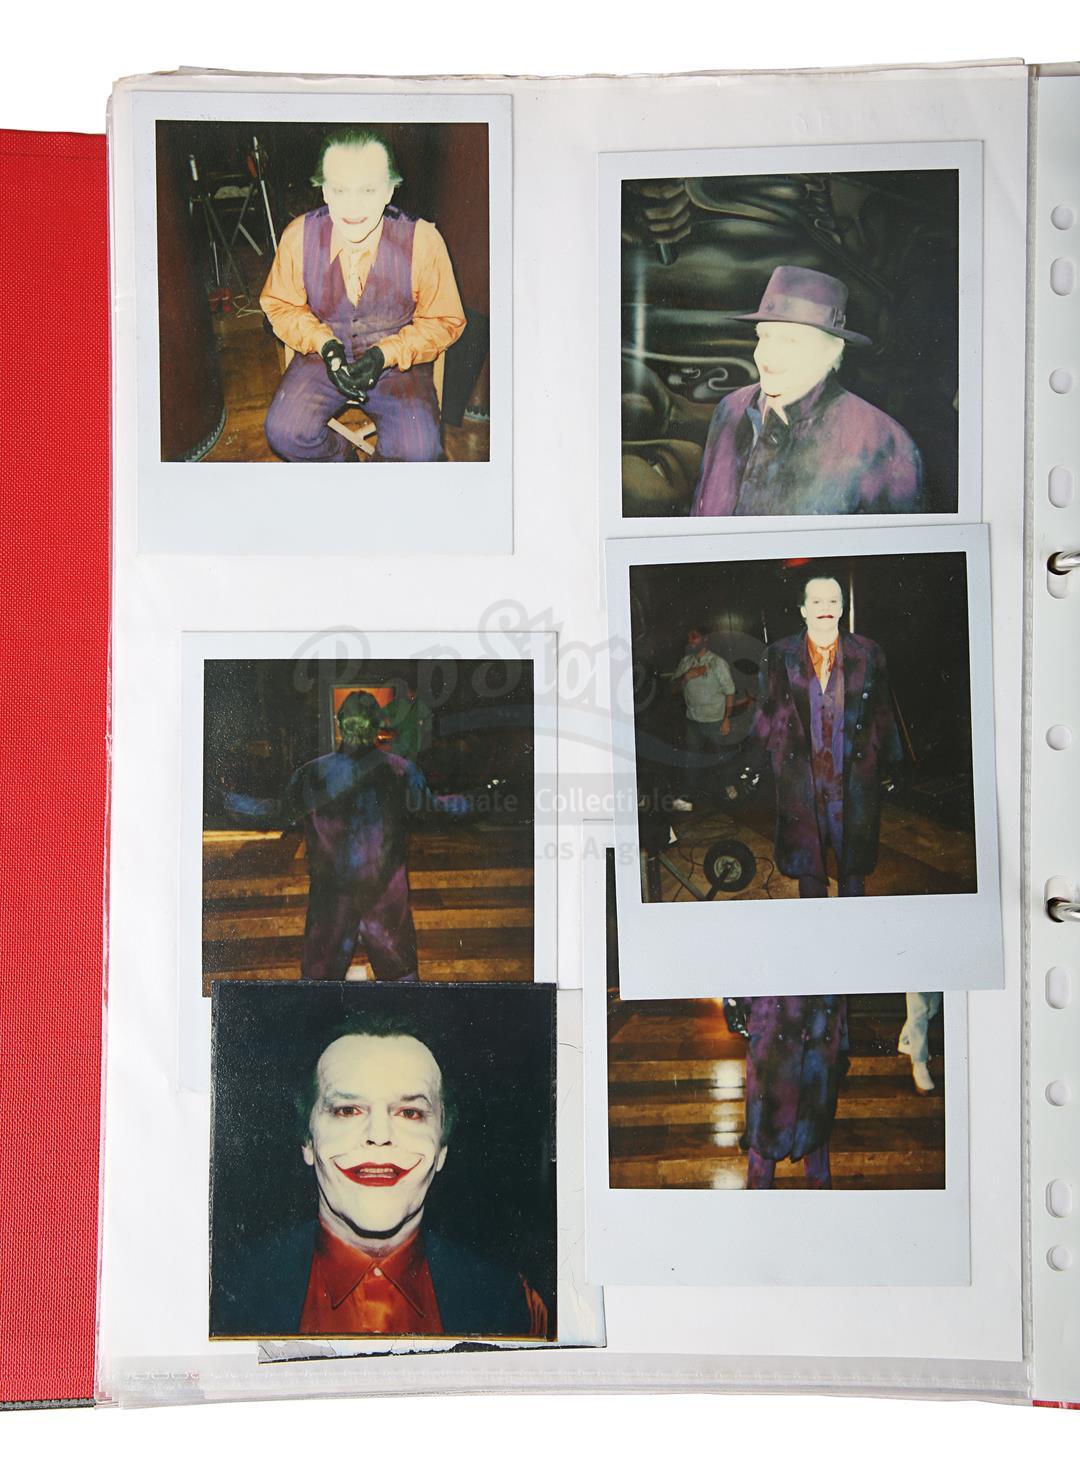 BATMAN (1989) - Costume Continuity Binder Featuring Archive of Main Cast Polaroids - Image 7 of 51